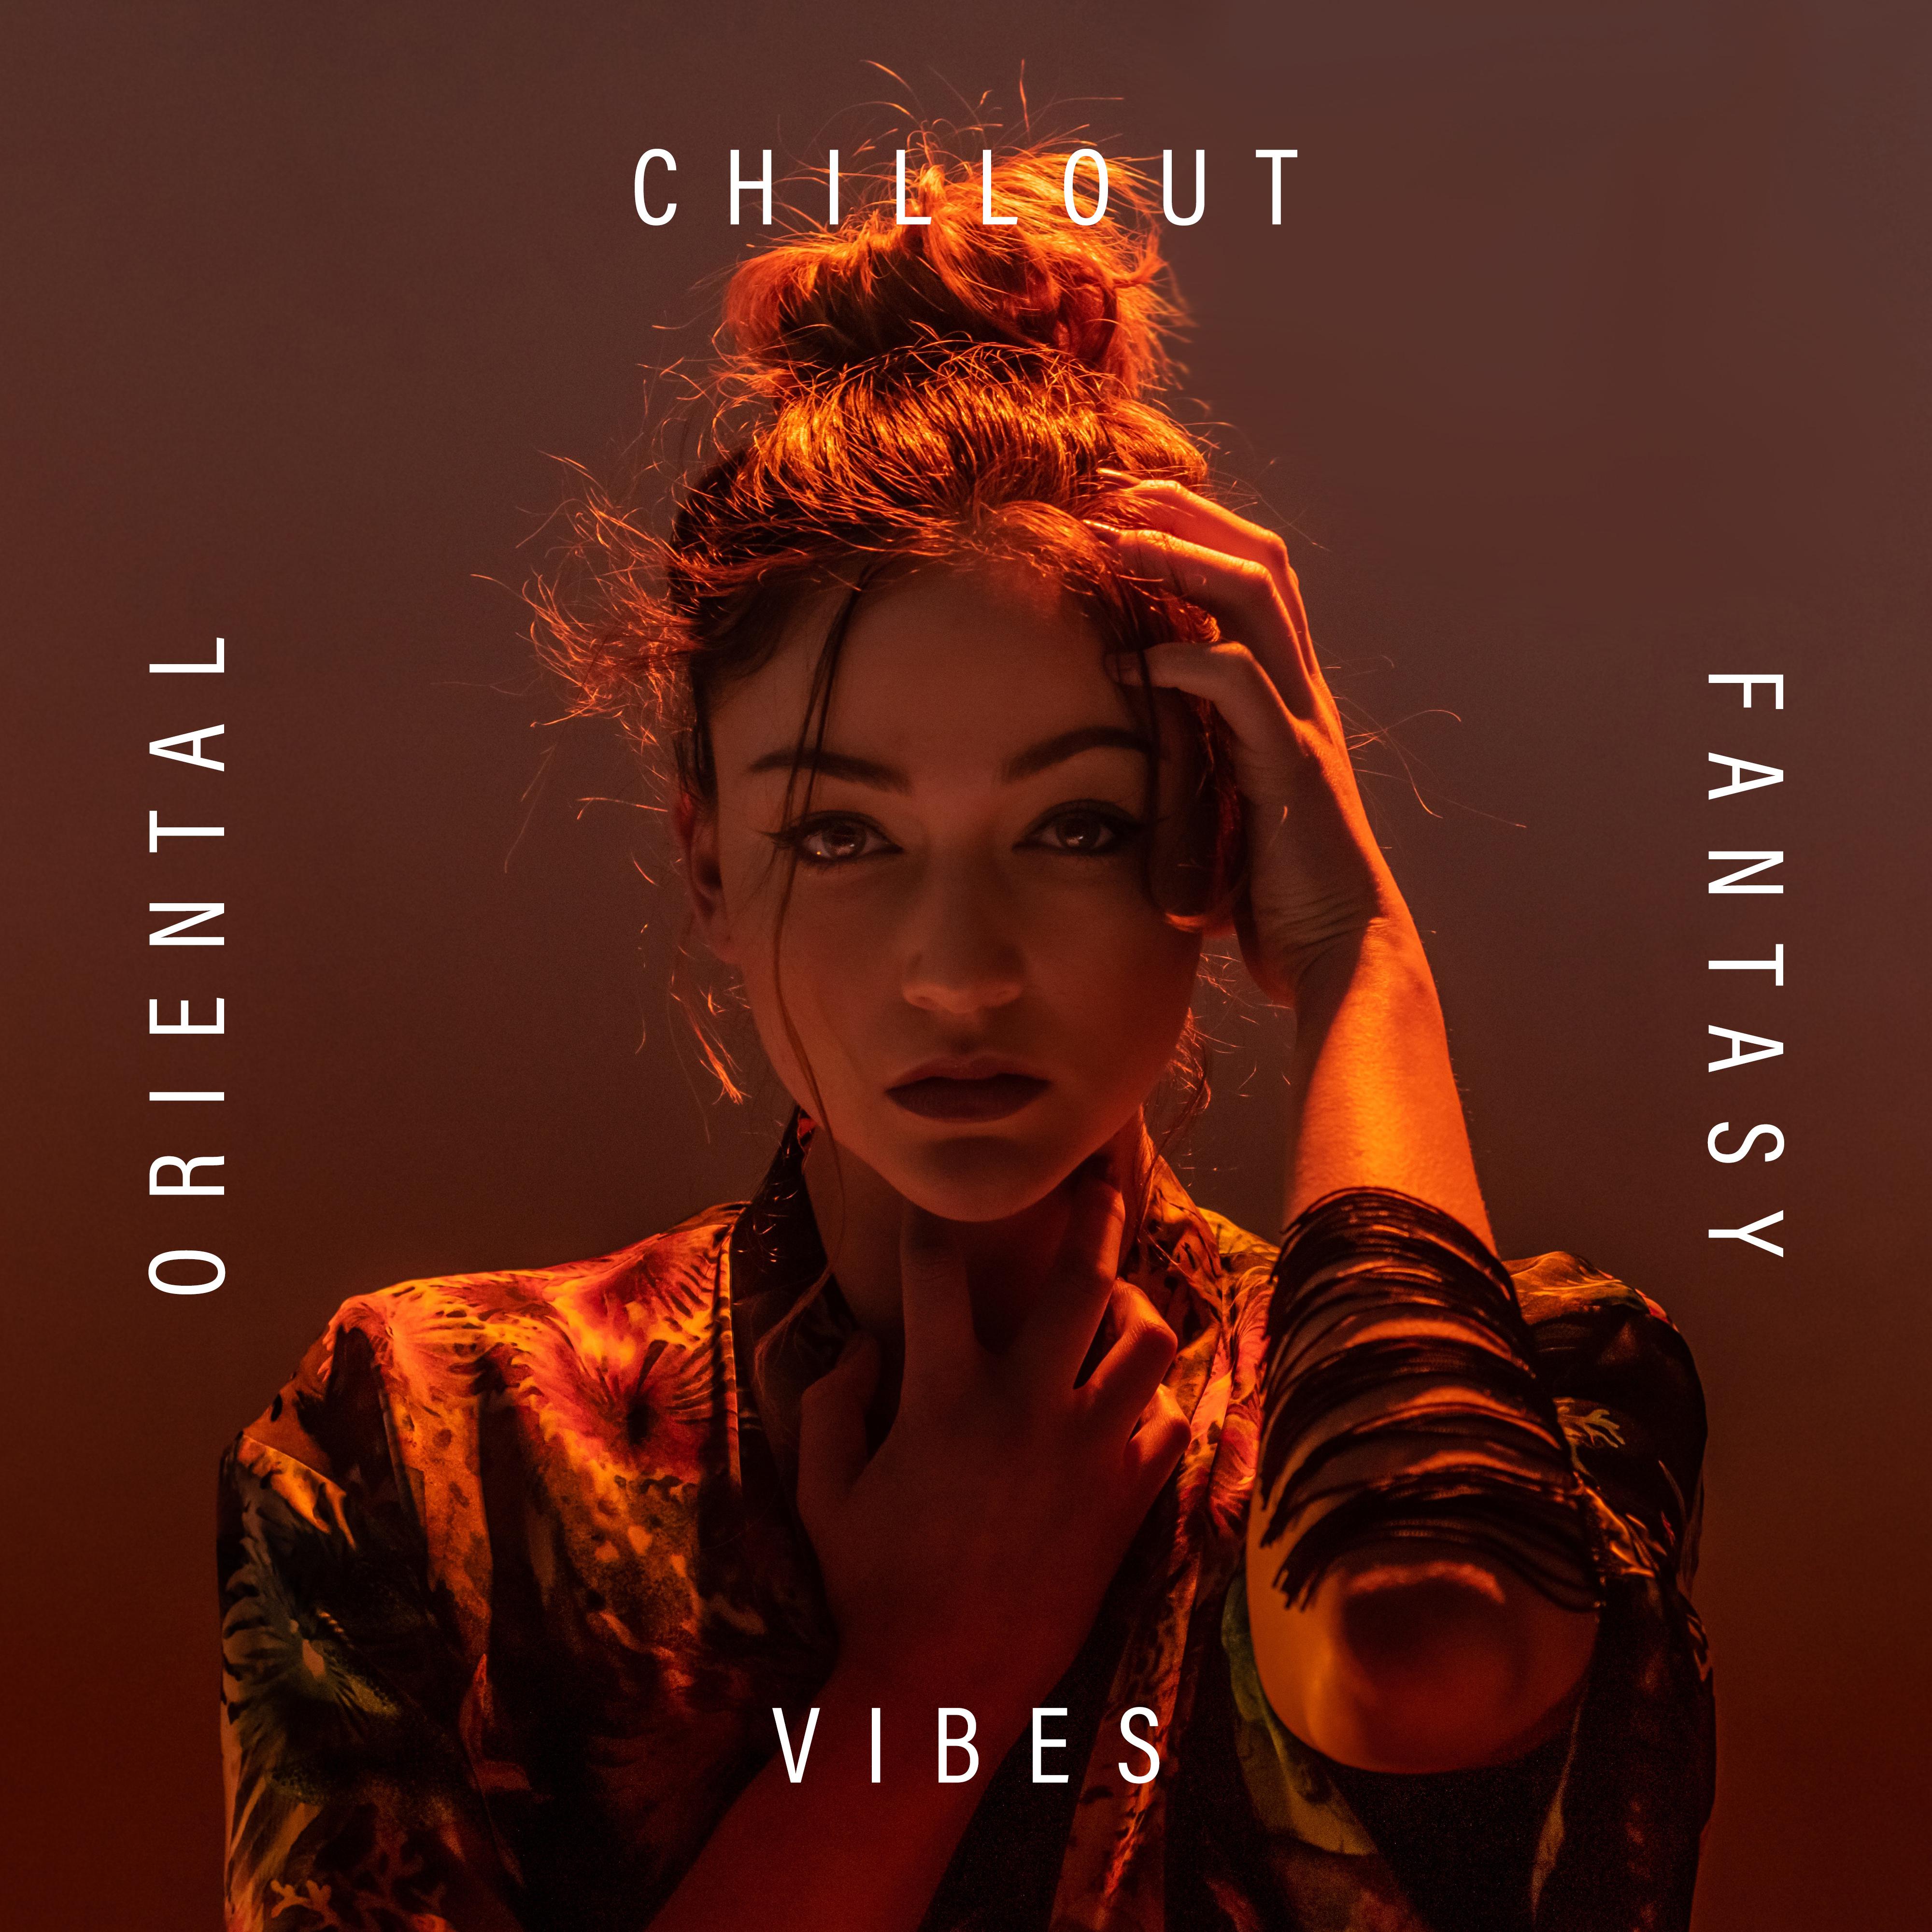 Oriental Chillout Fantasy Vibes: 2019 Chill Out Smooth Vibes Music Compilation, Relaxing Melodies with Oriental Sounds